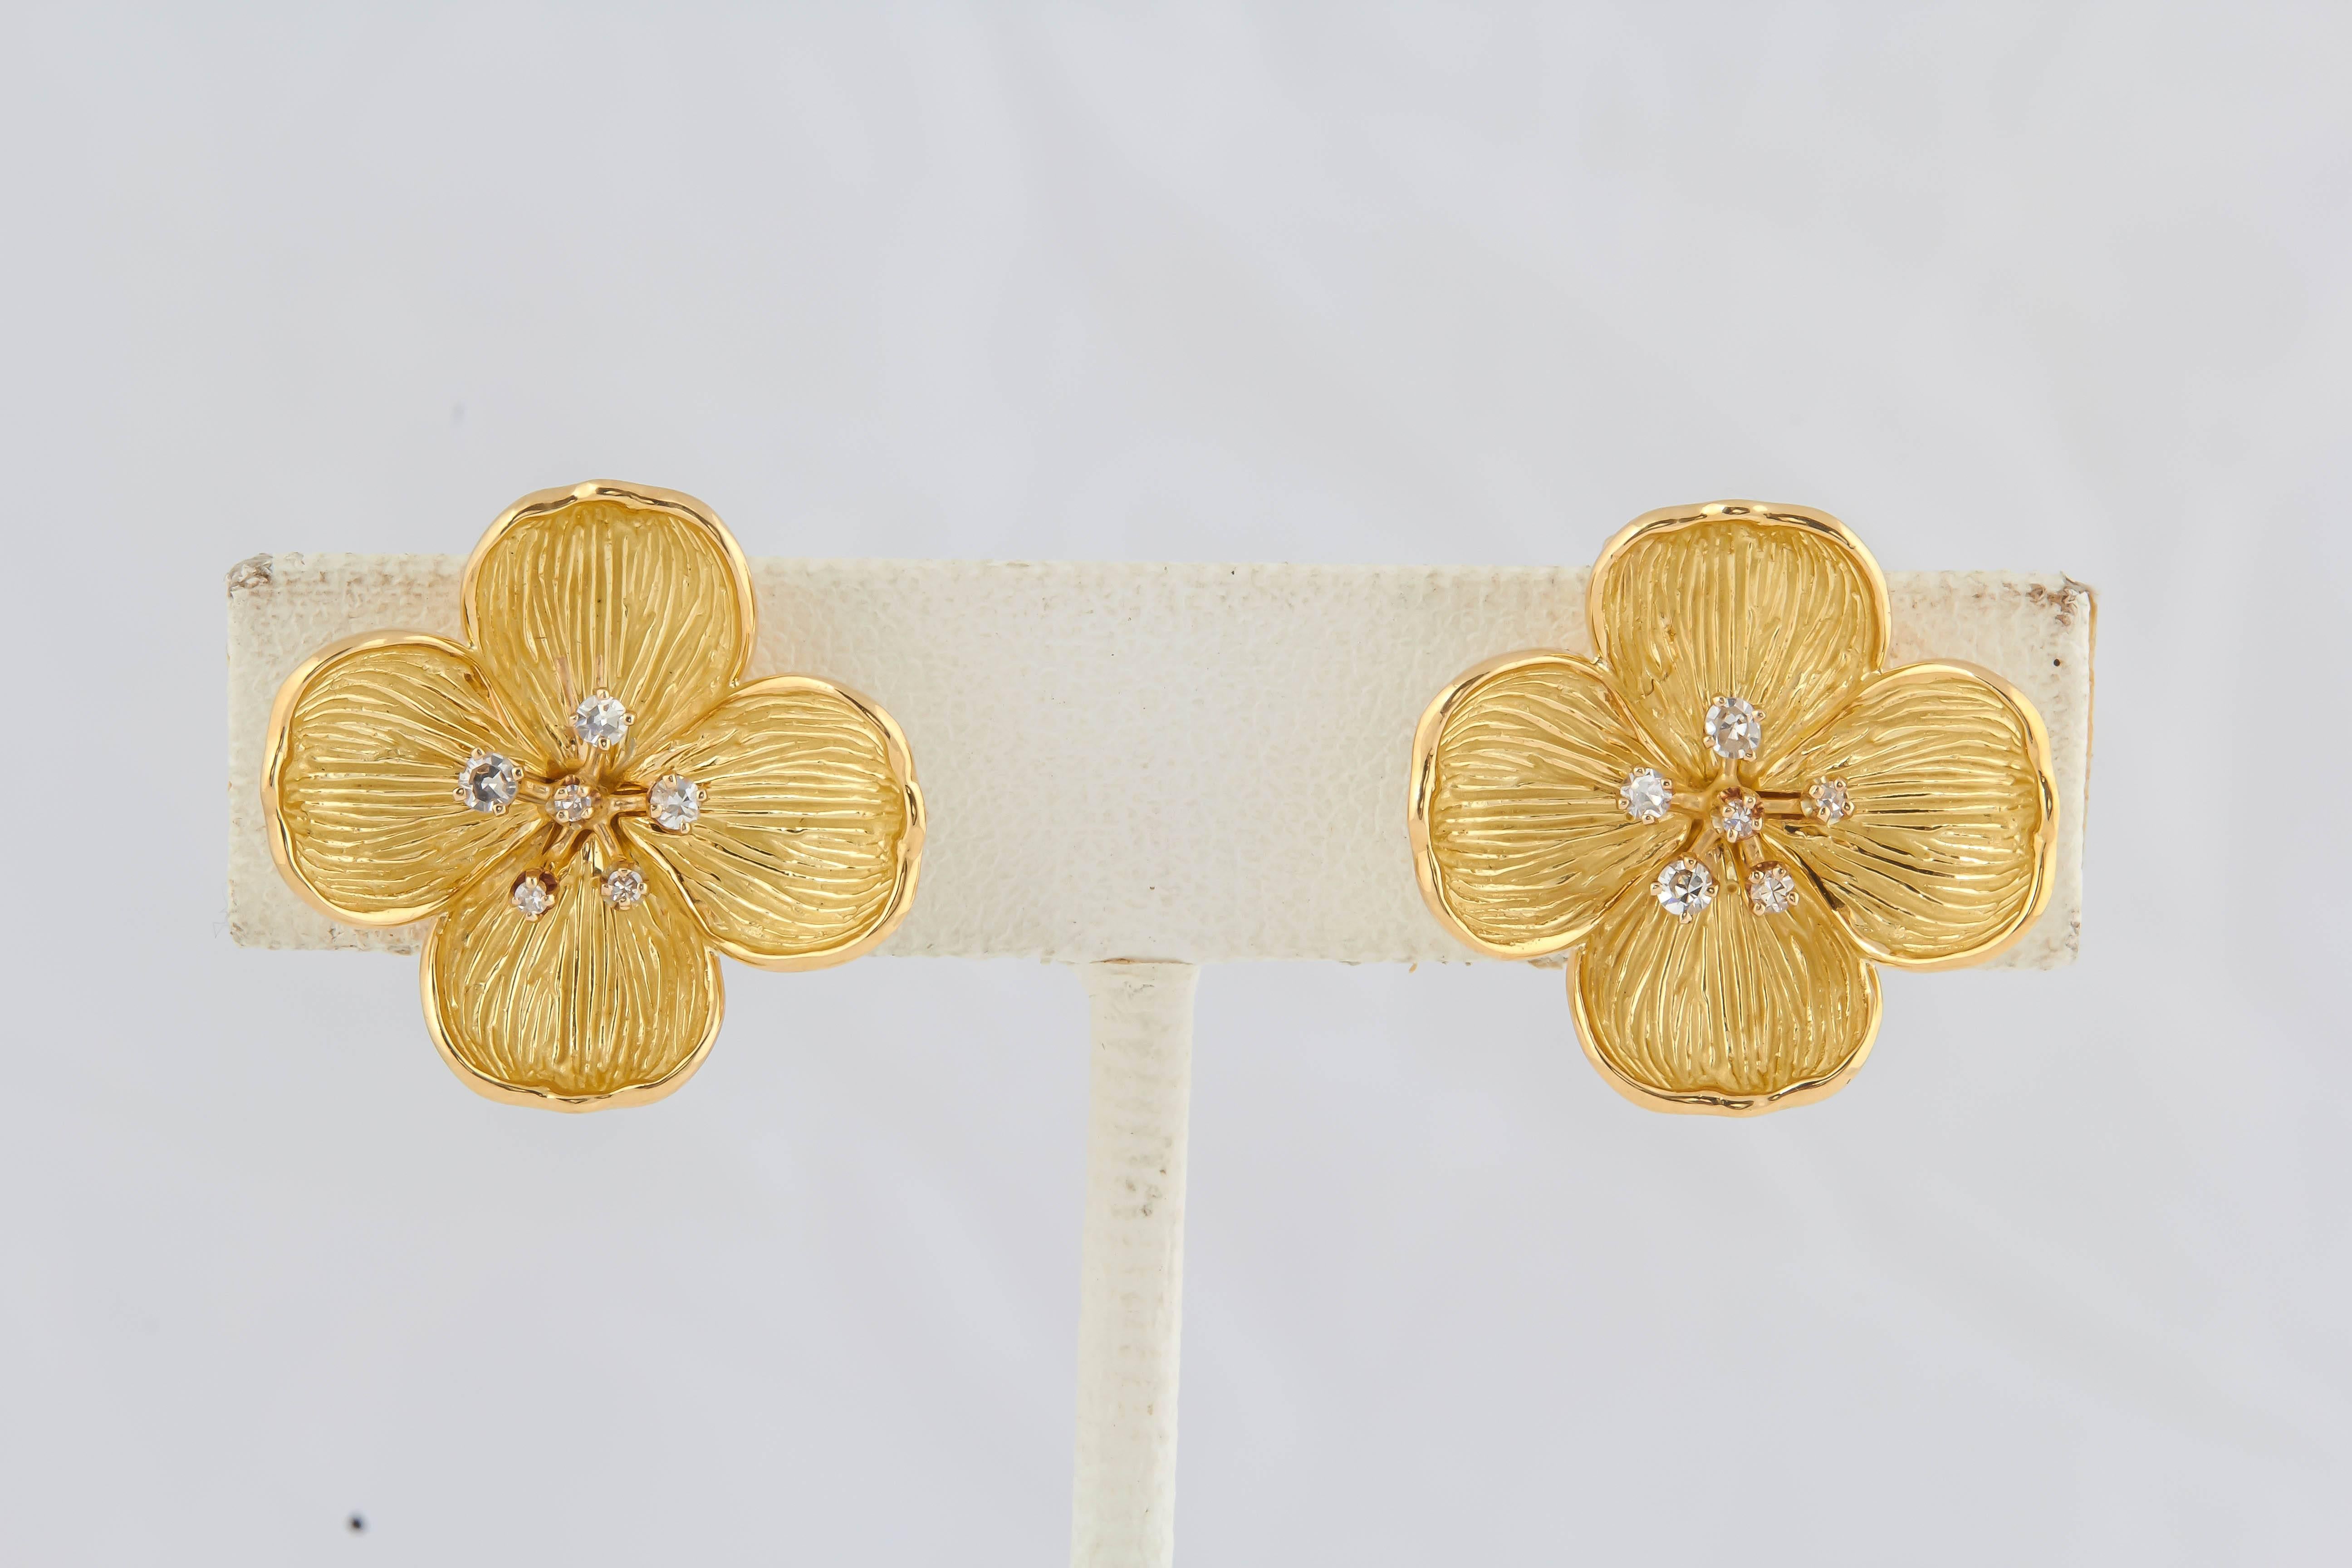 These Tiffany-style dogwood flowers are beautiful on the ear. The petals are delicately  engraved for natural texture and the center is a spray of diamonds These are clip earrings for a post can be added..